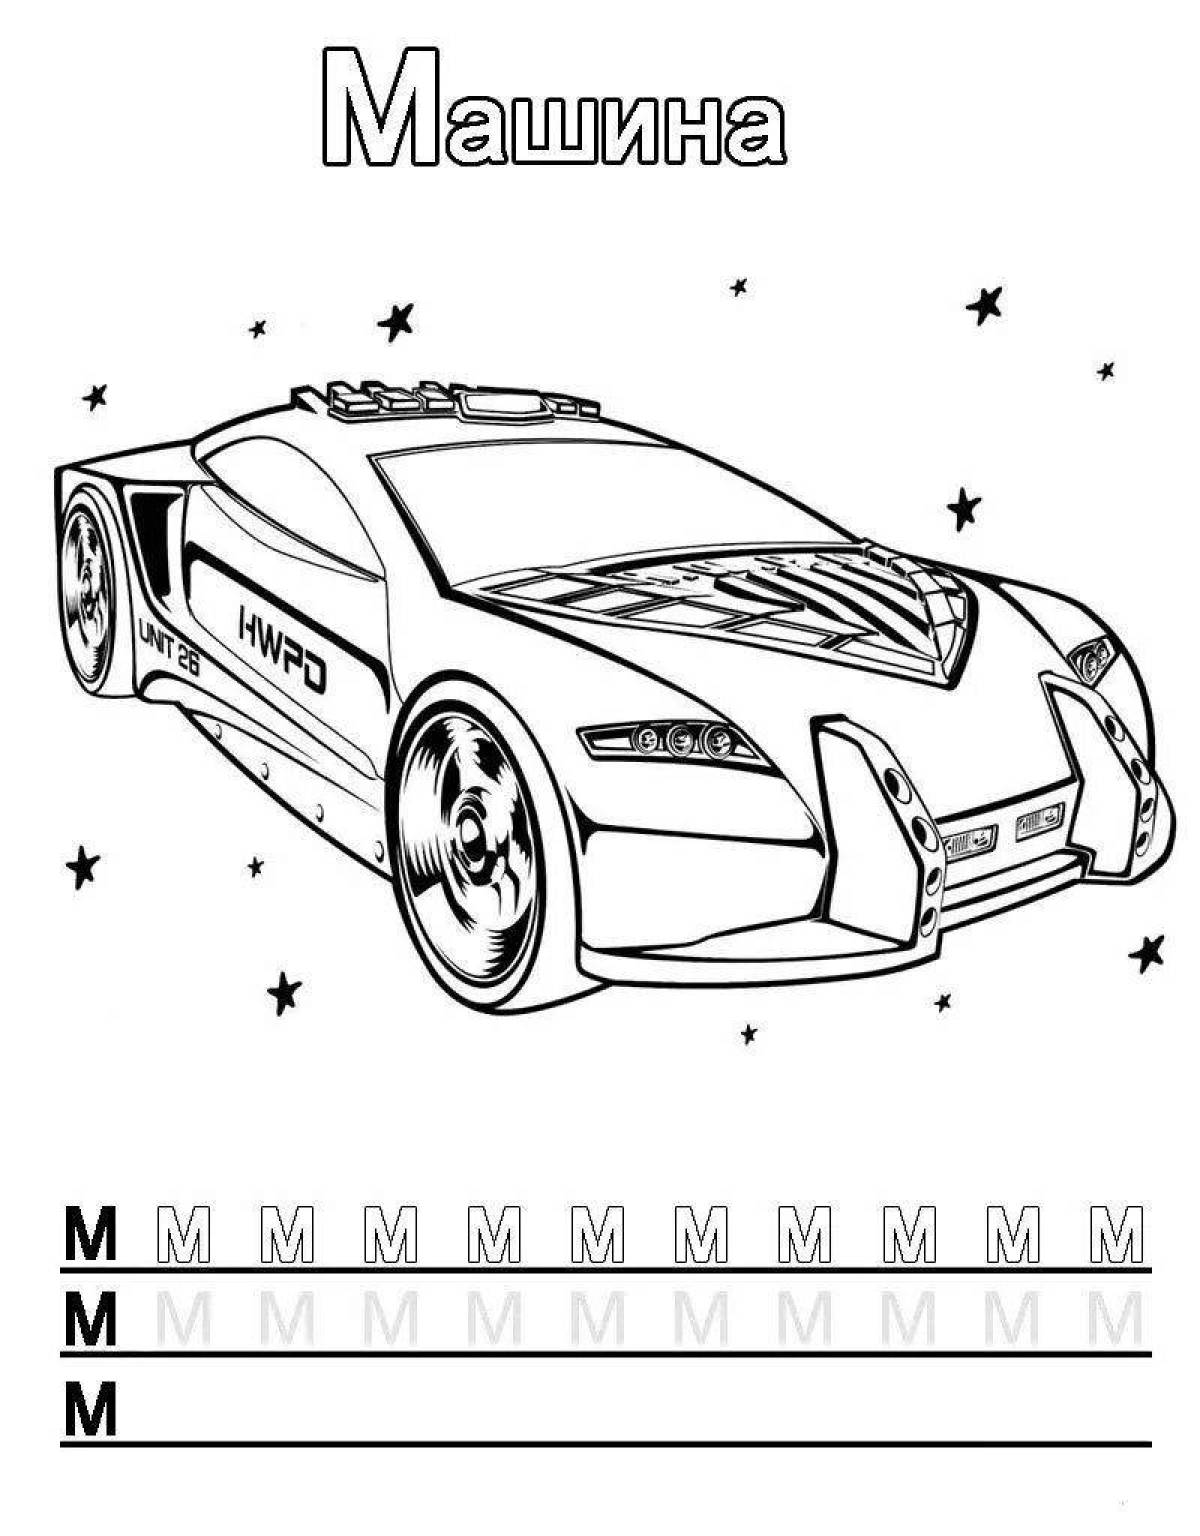 Adorable coloring book with car number for 5-6 year olds